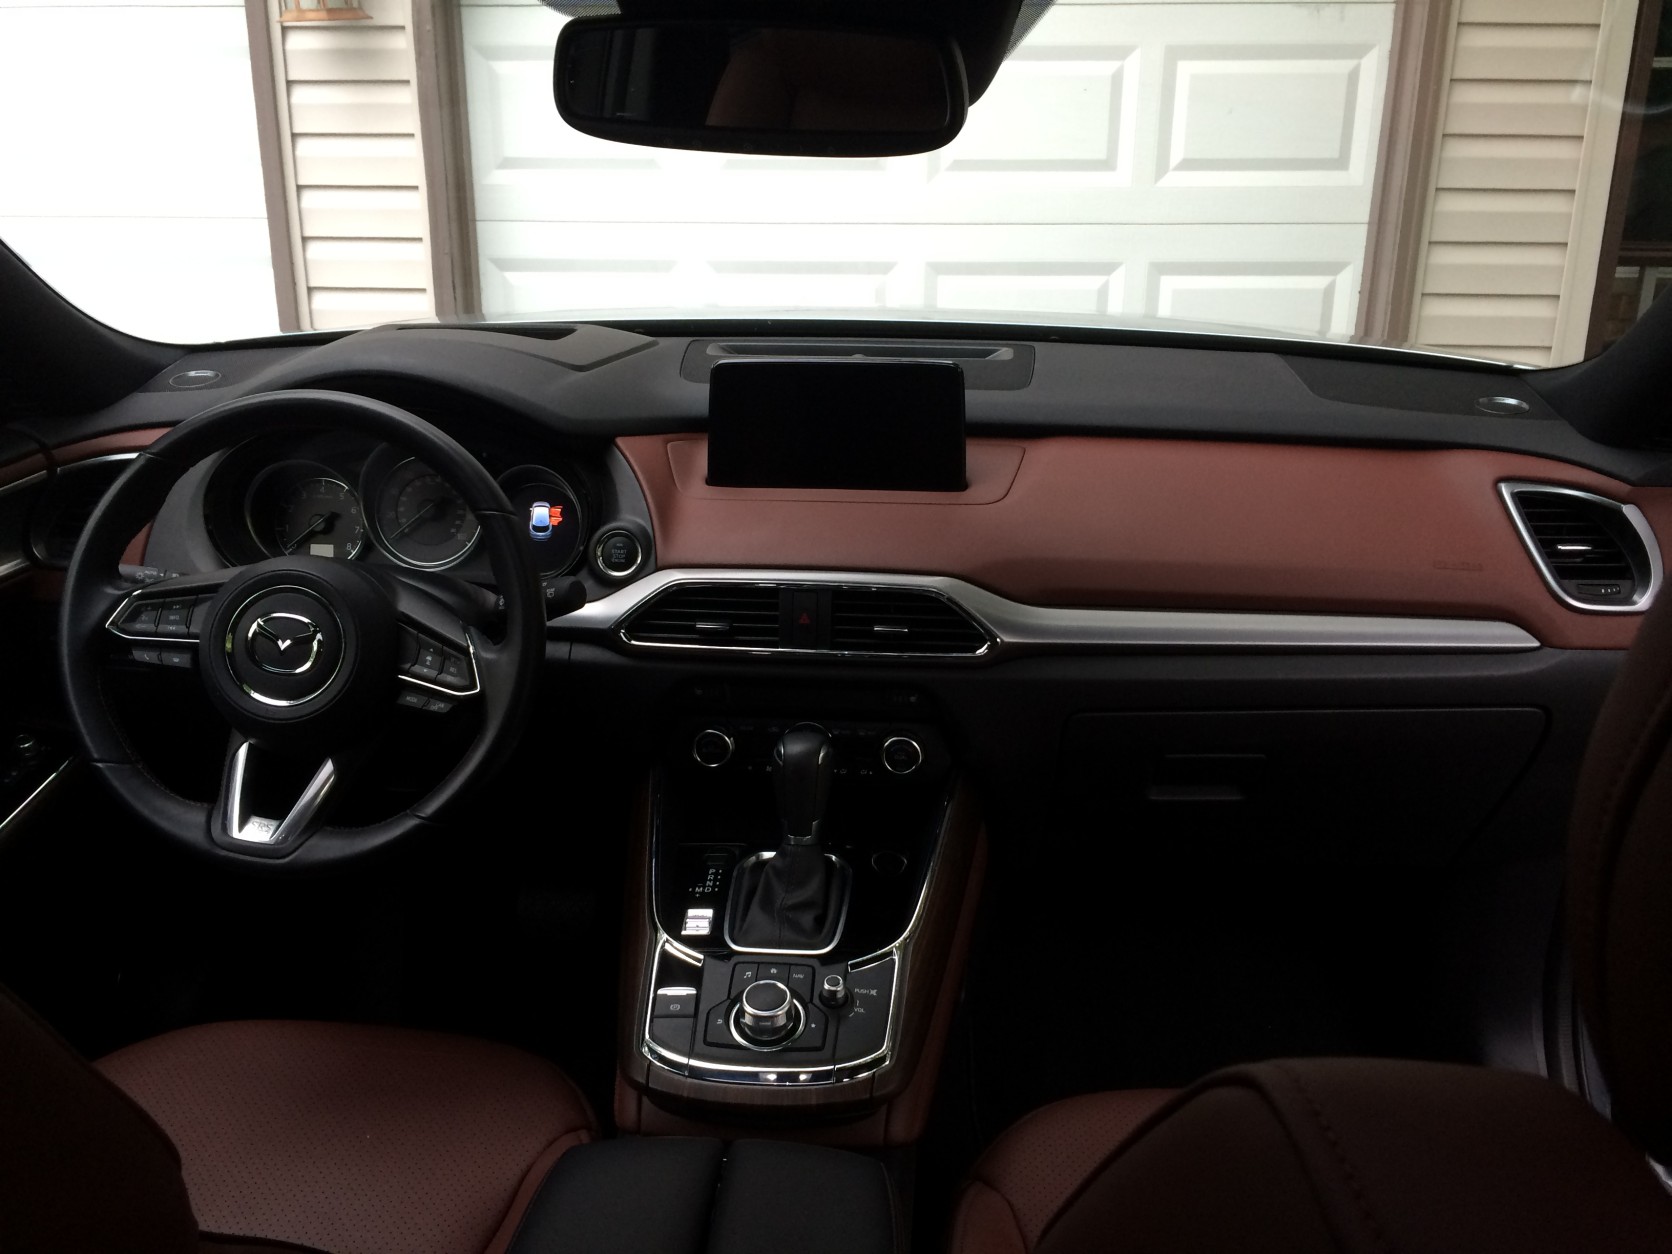 Materials used on the Mazda CX-9 interior are top notch for this class and near luxury standards. (WTOP/Mike Parris)